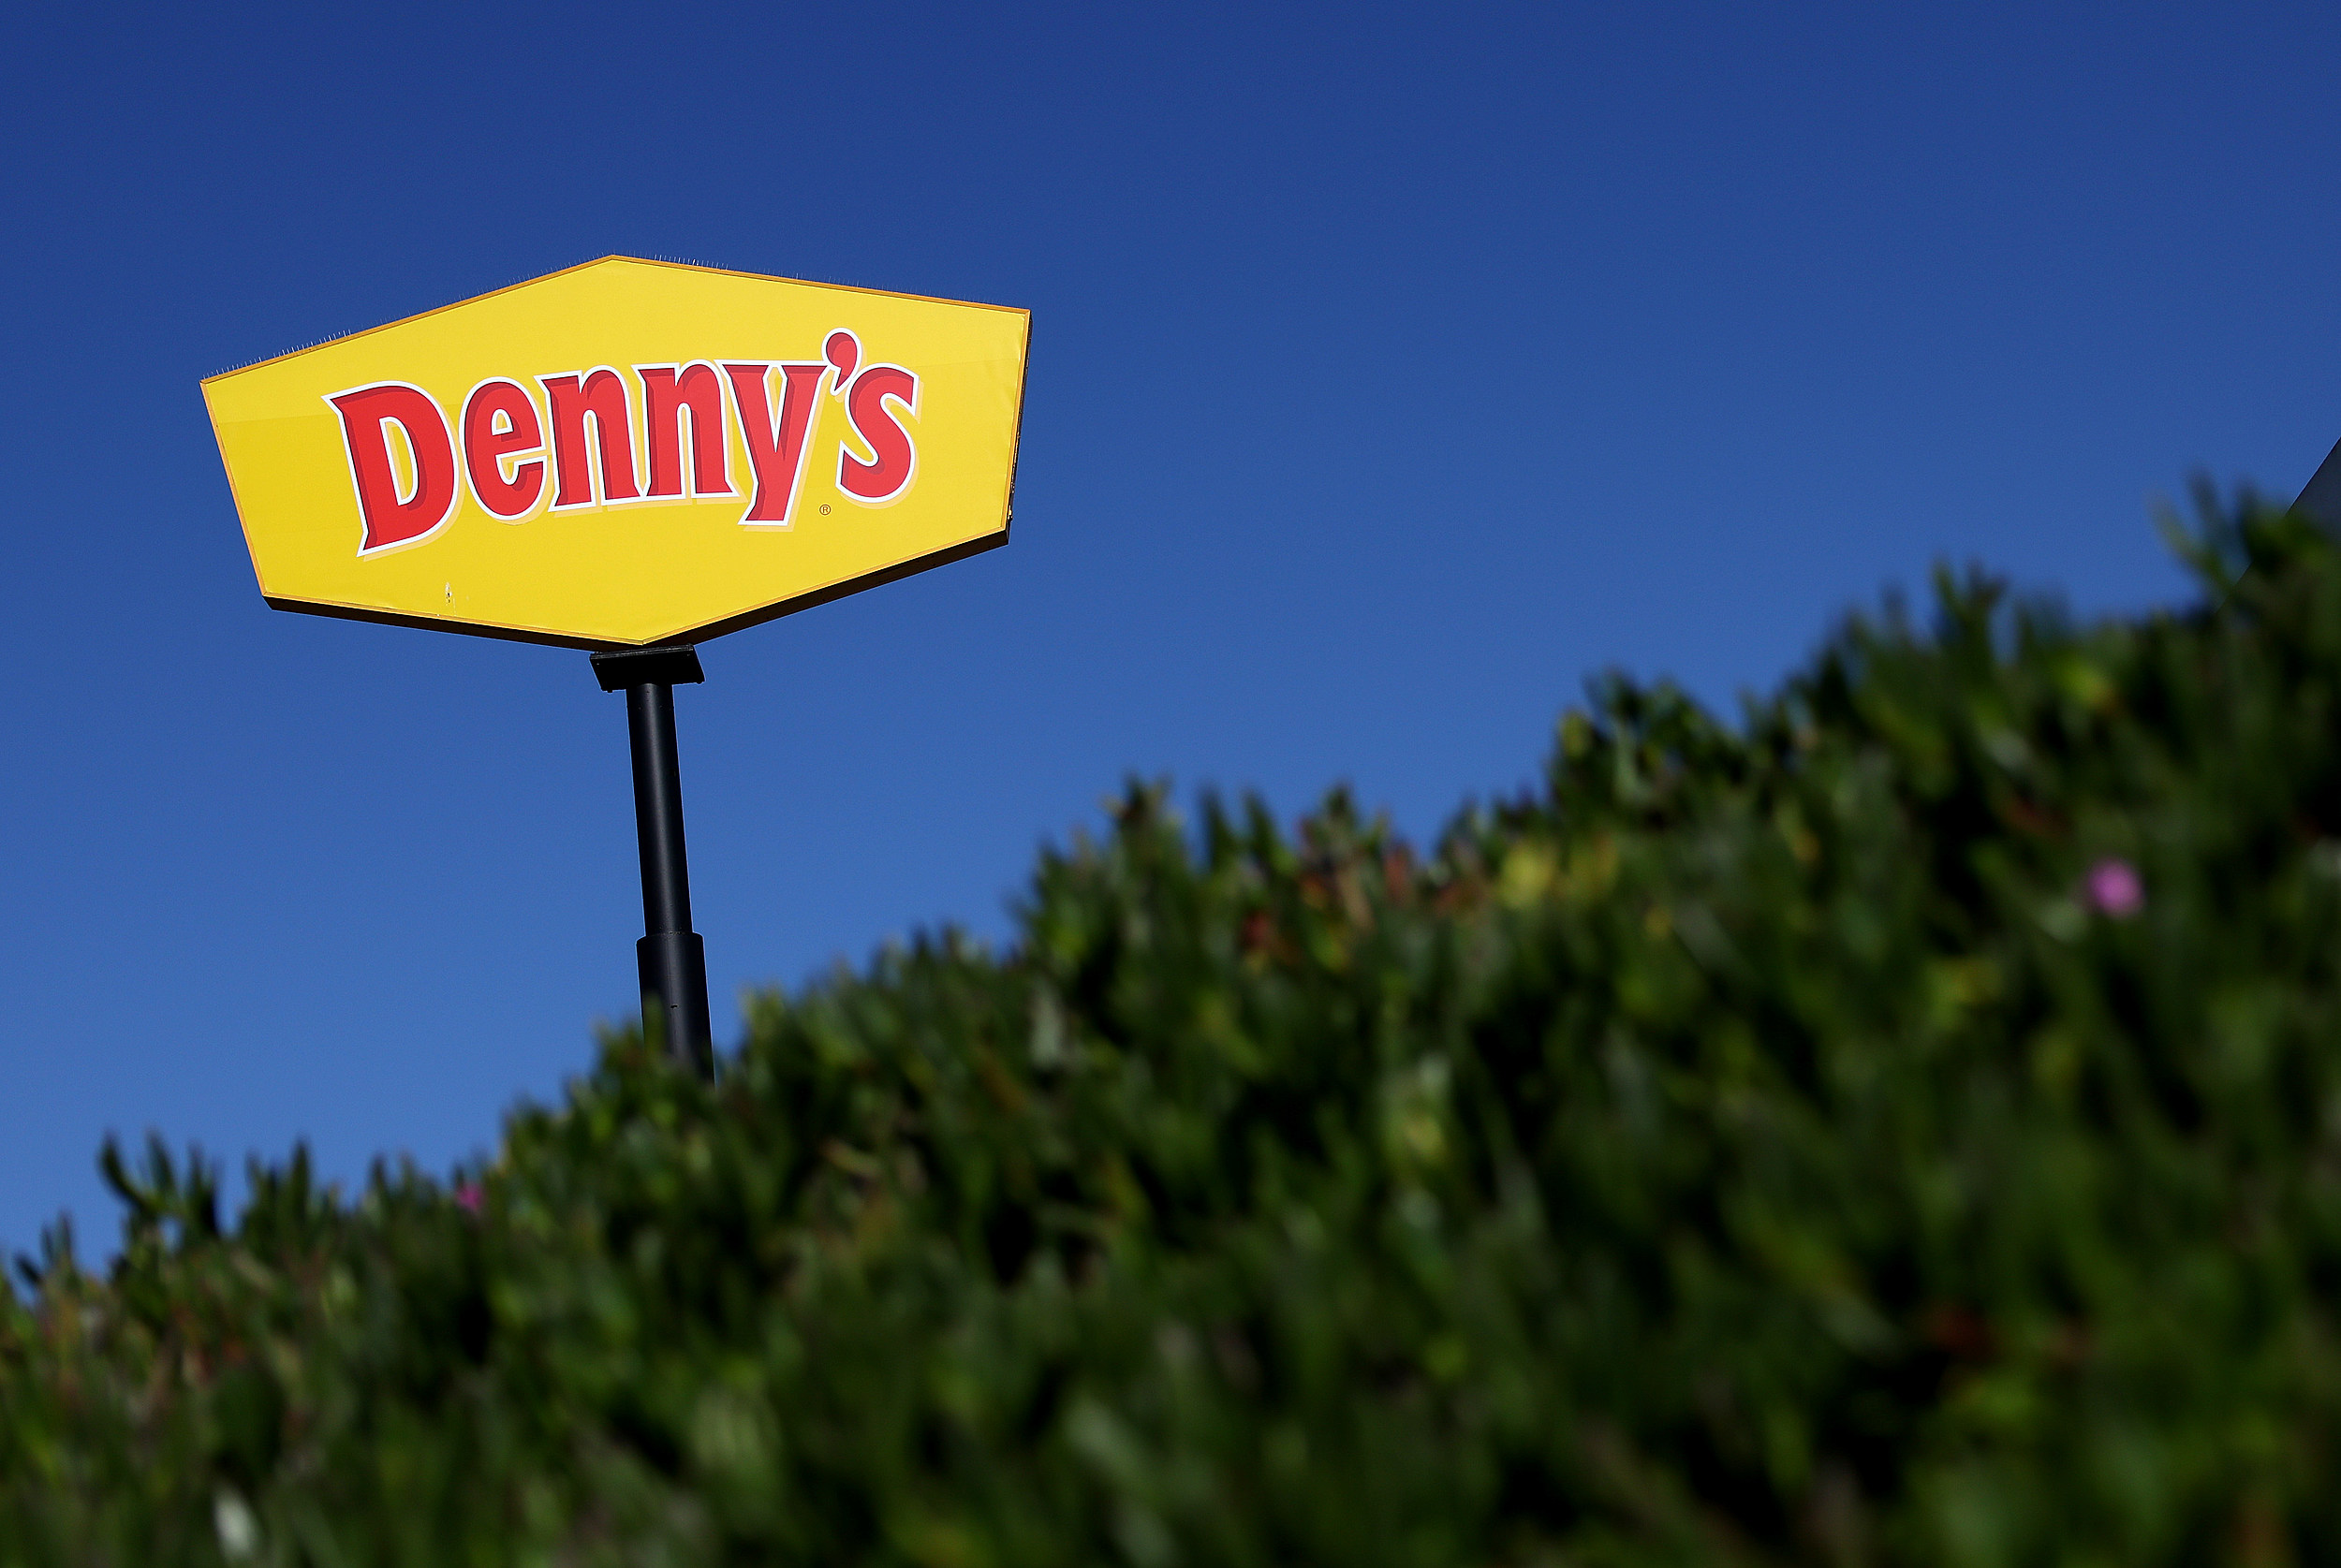 3 things you should eat at Denny's in Japan, according to staff